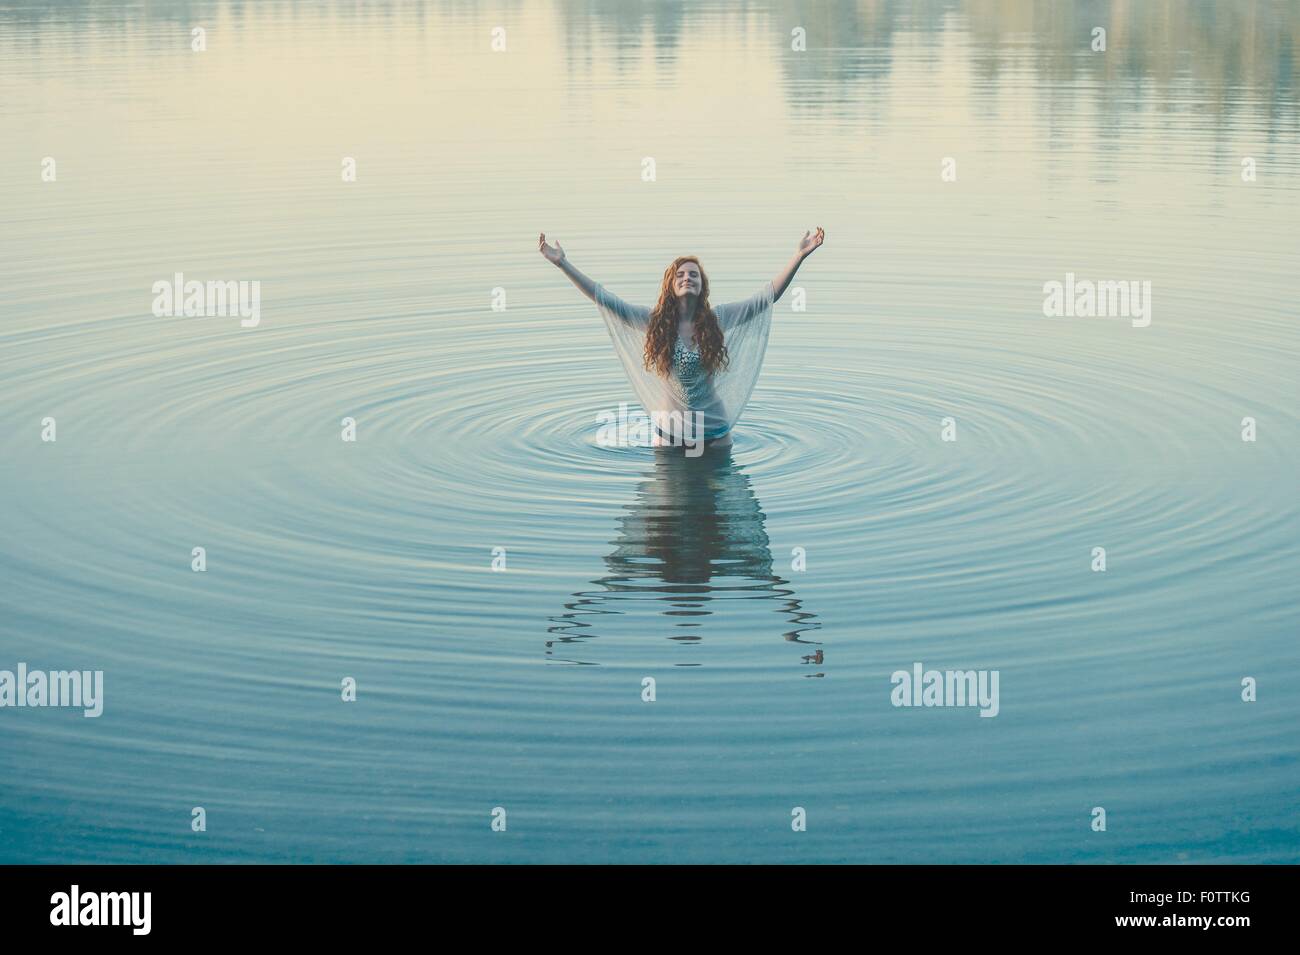 Young woman standing in middle of lake ripples with arms open Stock Photo